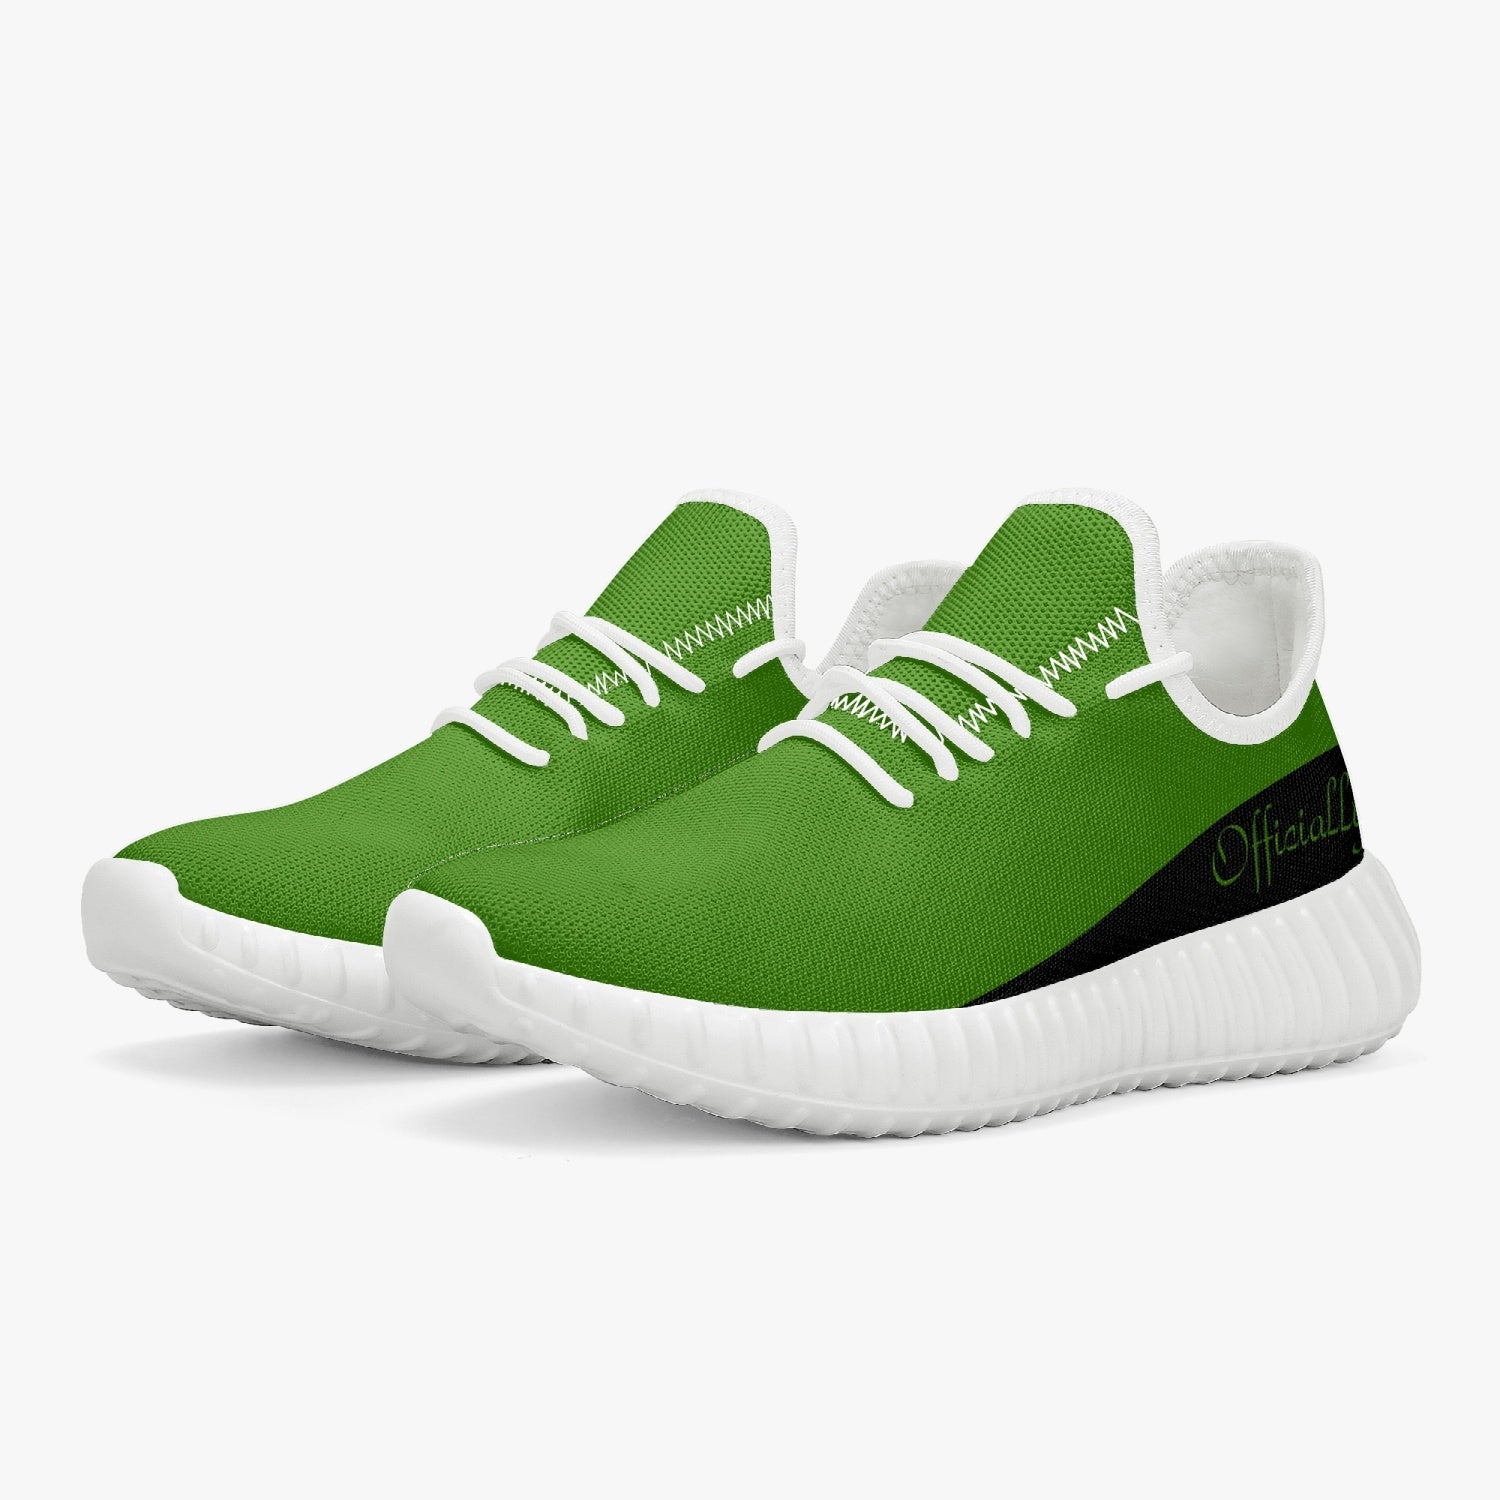 Officially Sexy Green & Black Laser Mesh Knit Sneakers - With White or Black Sole